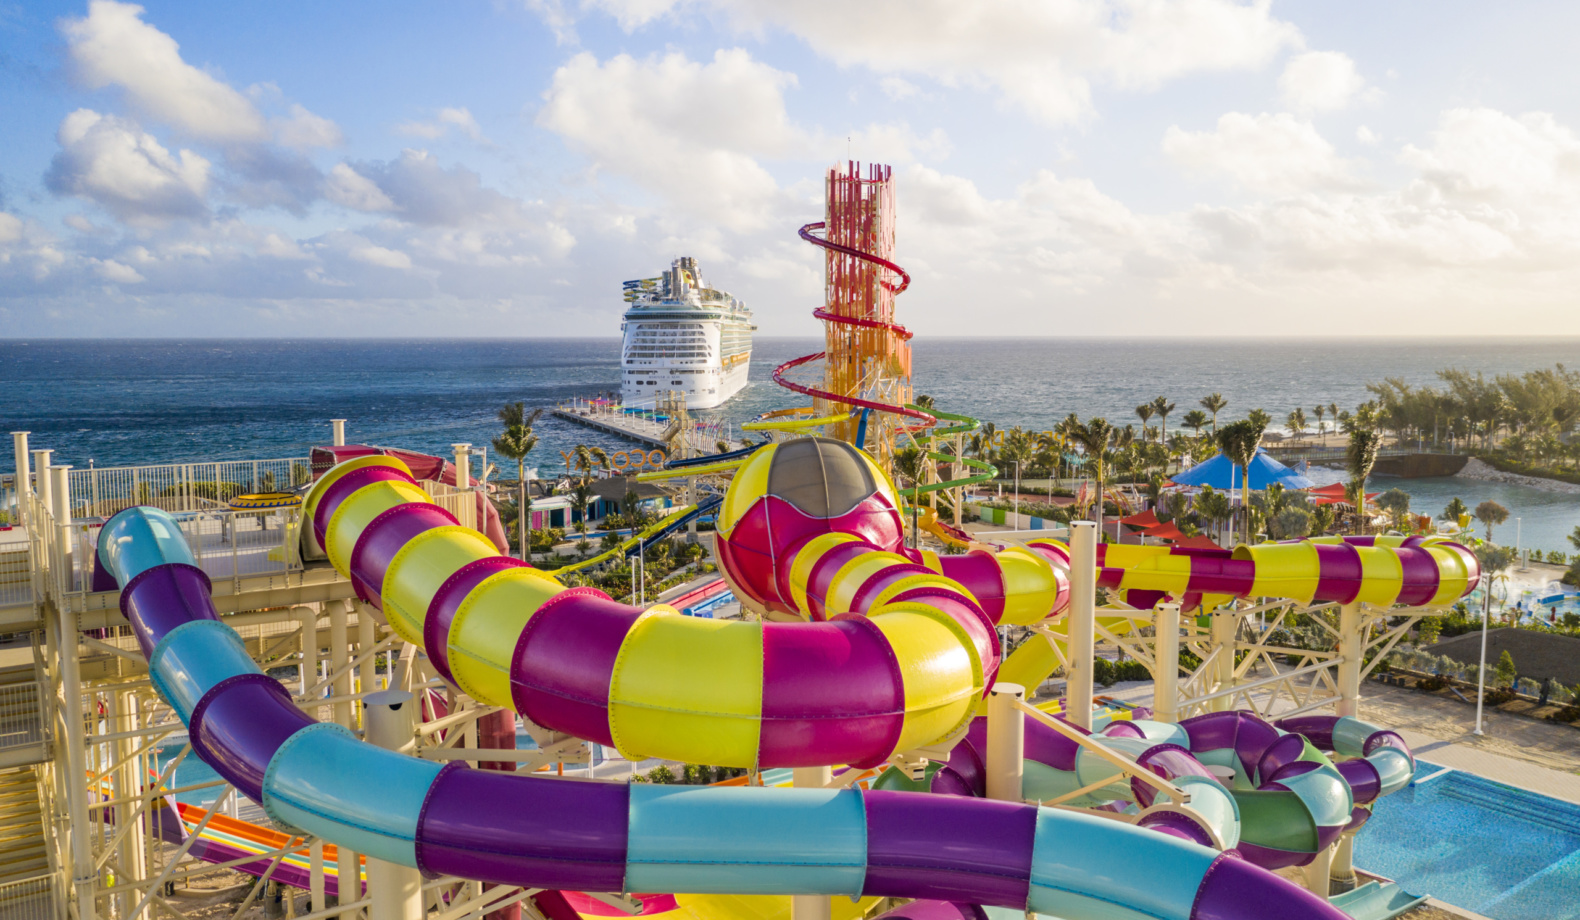 colorful water slides and water slide tower with cruise ship in the background